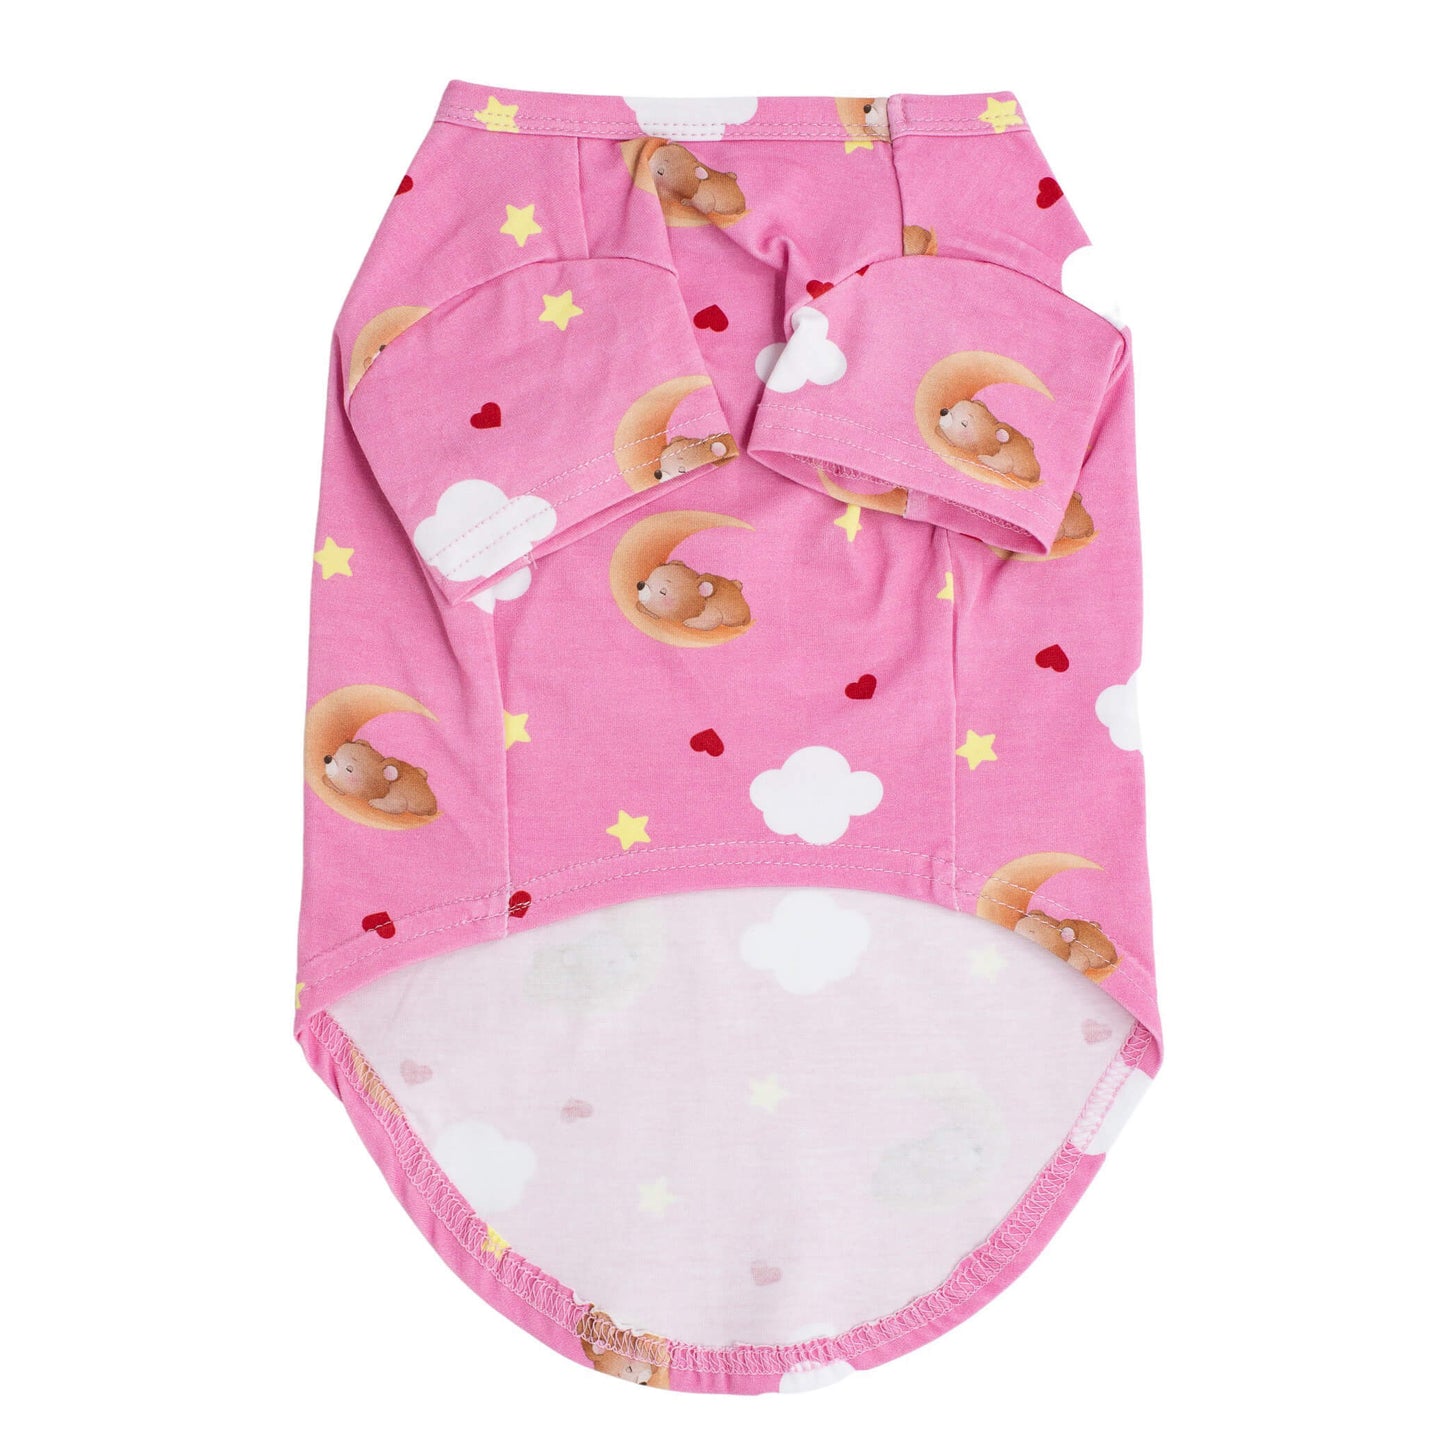 Front flat lay showing the Lil dreamer pink dog pyjamas. The pyjamas have a pink back ground and covered with stars, clouds, and love hearts.